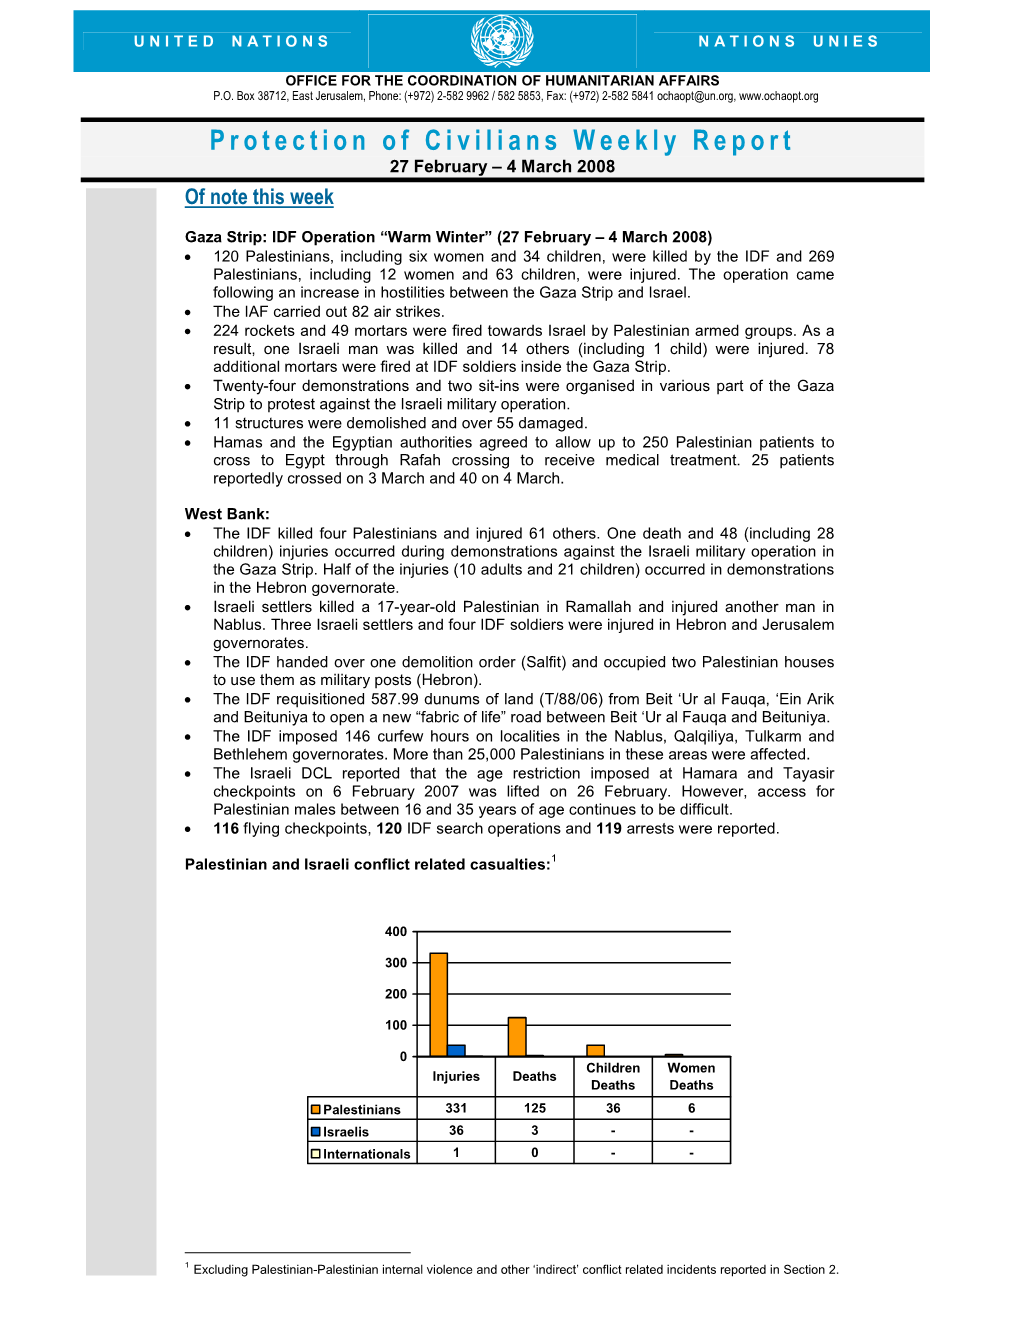 Protection of Civilians Weekly Report 27 February – 4 March 2008 of Note This Week